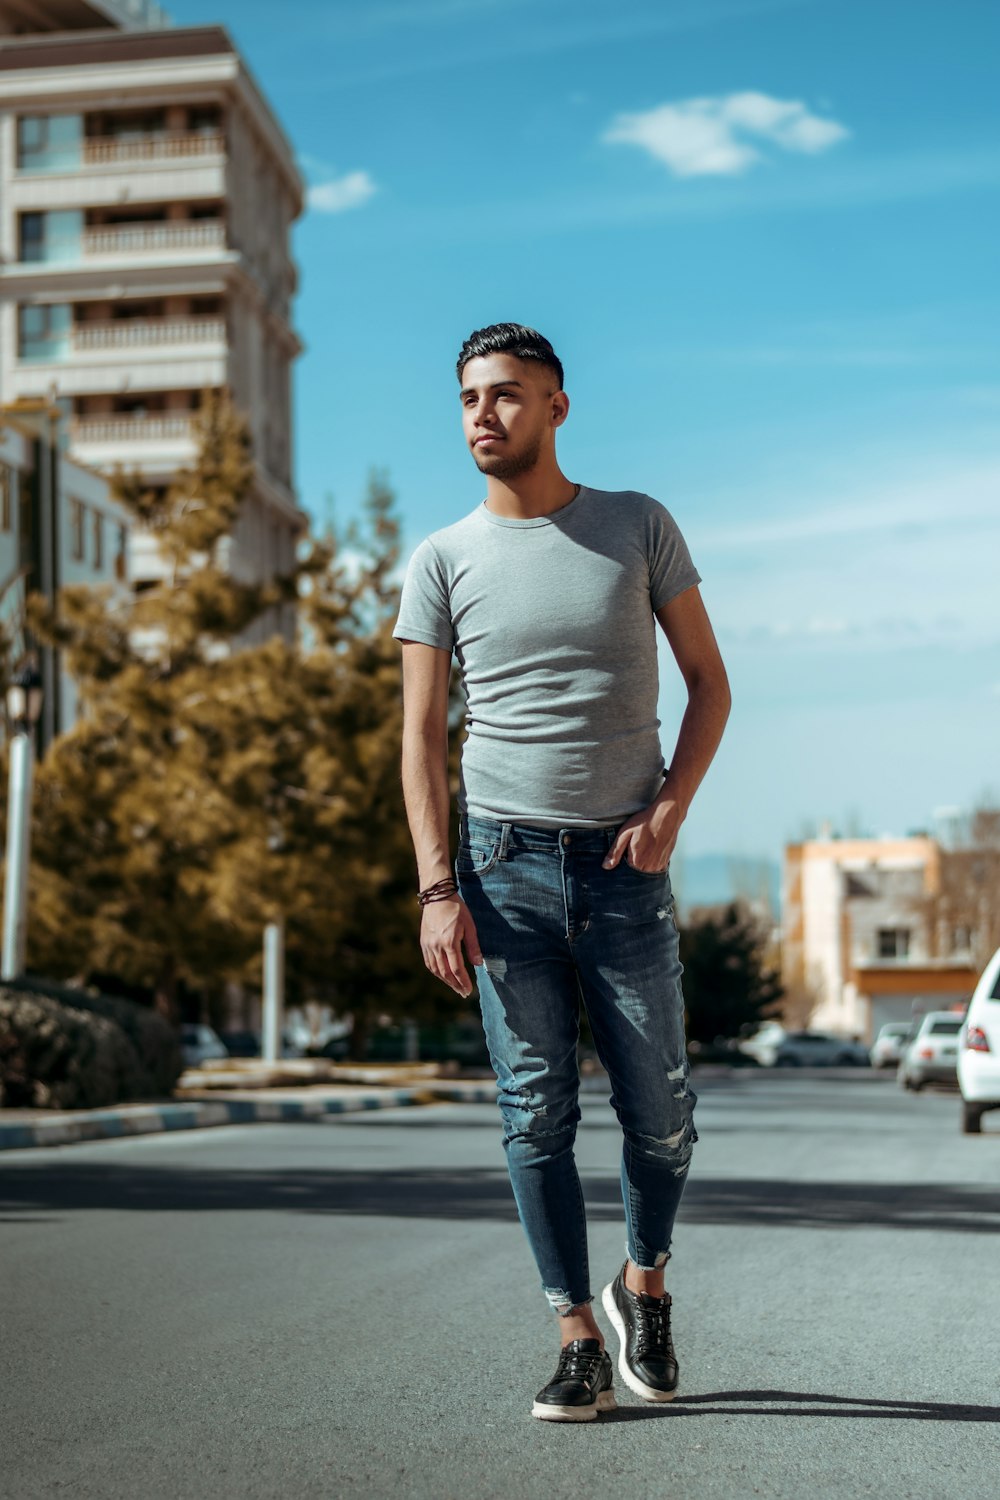 man in white crew neck t-shirt and blue denim jeans standing on road during  daytime photo – Free Iranian people Image on Unsplash